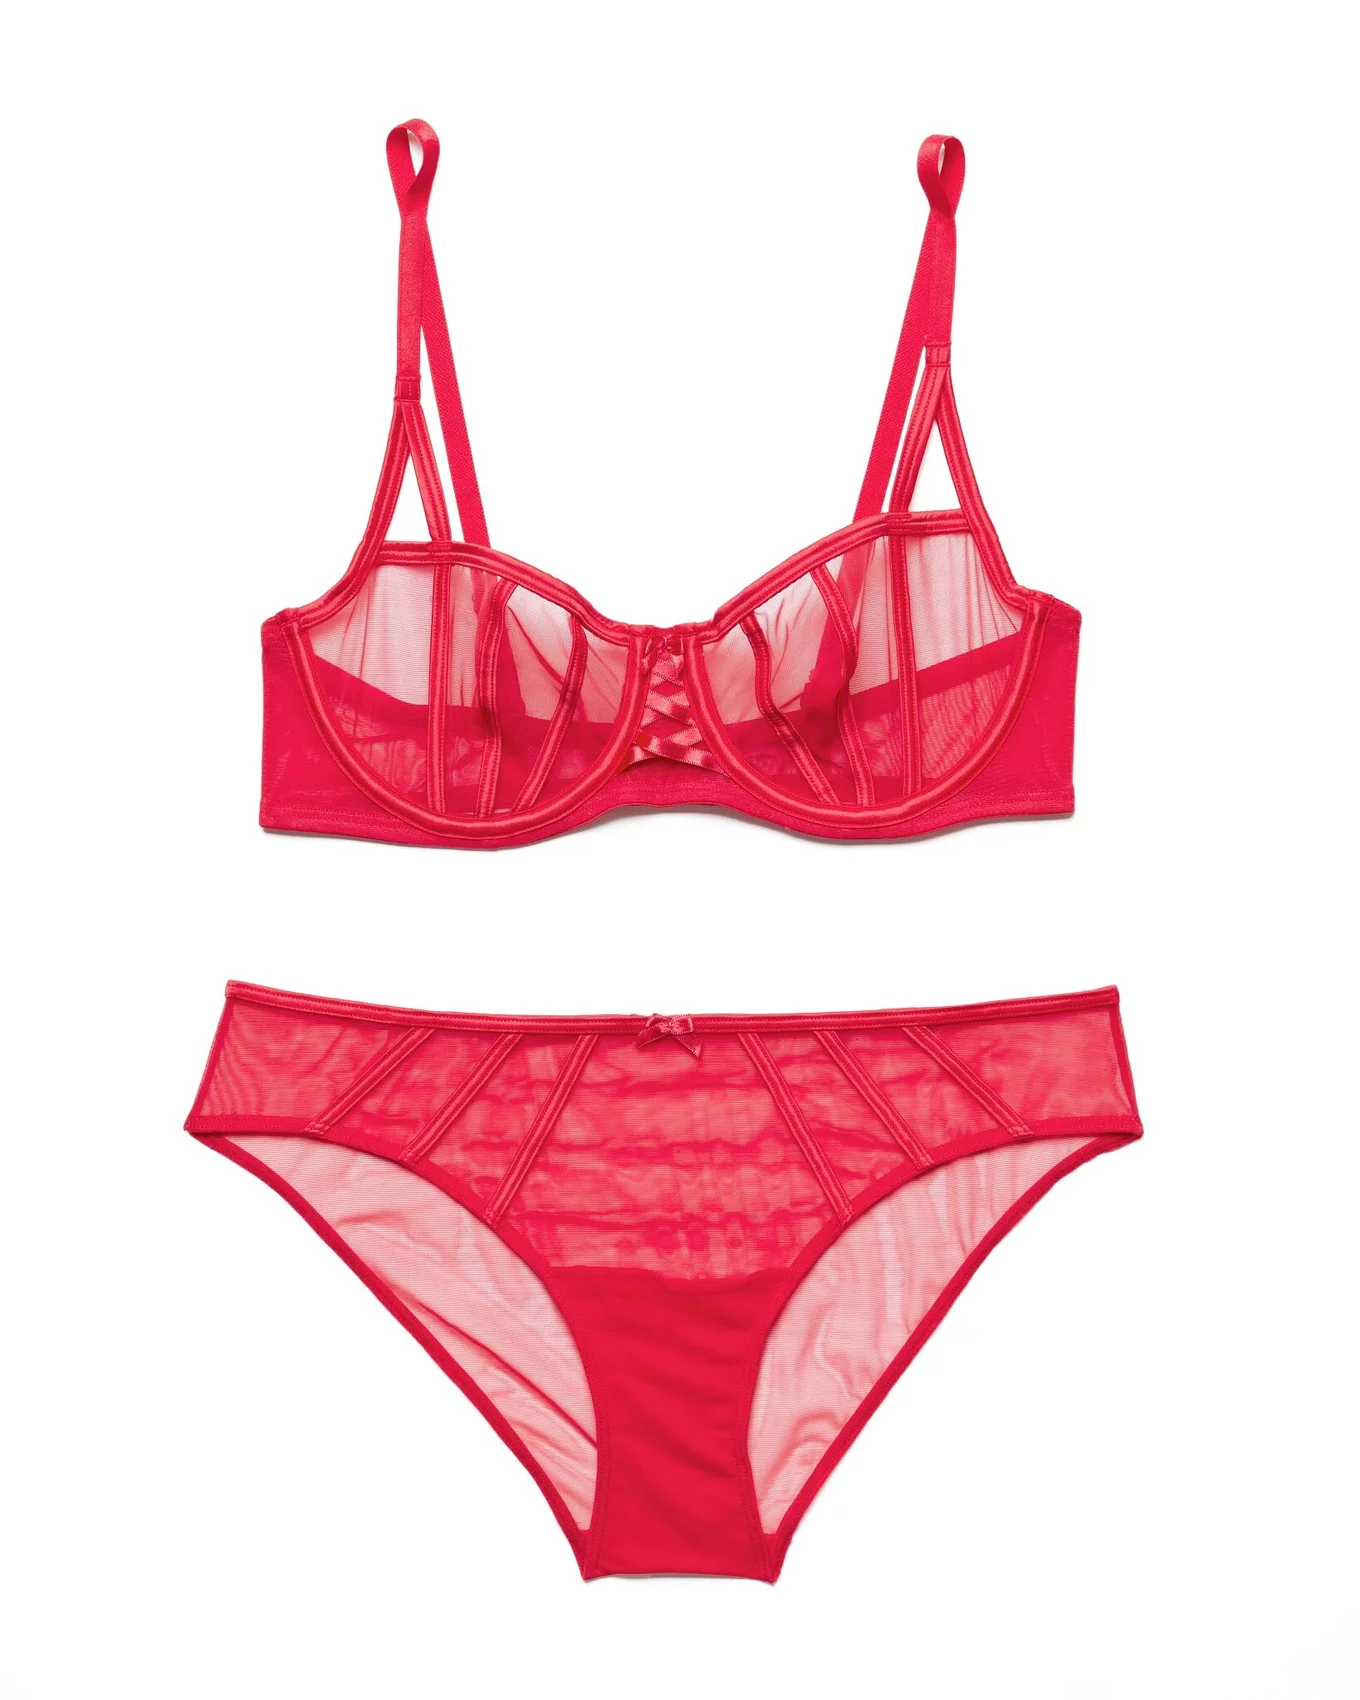 Track No Show Unlined Balconette Bra - Red - 36 - D at Skims